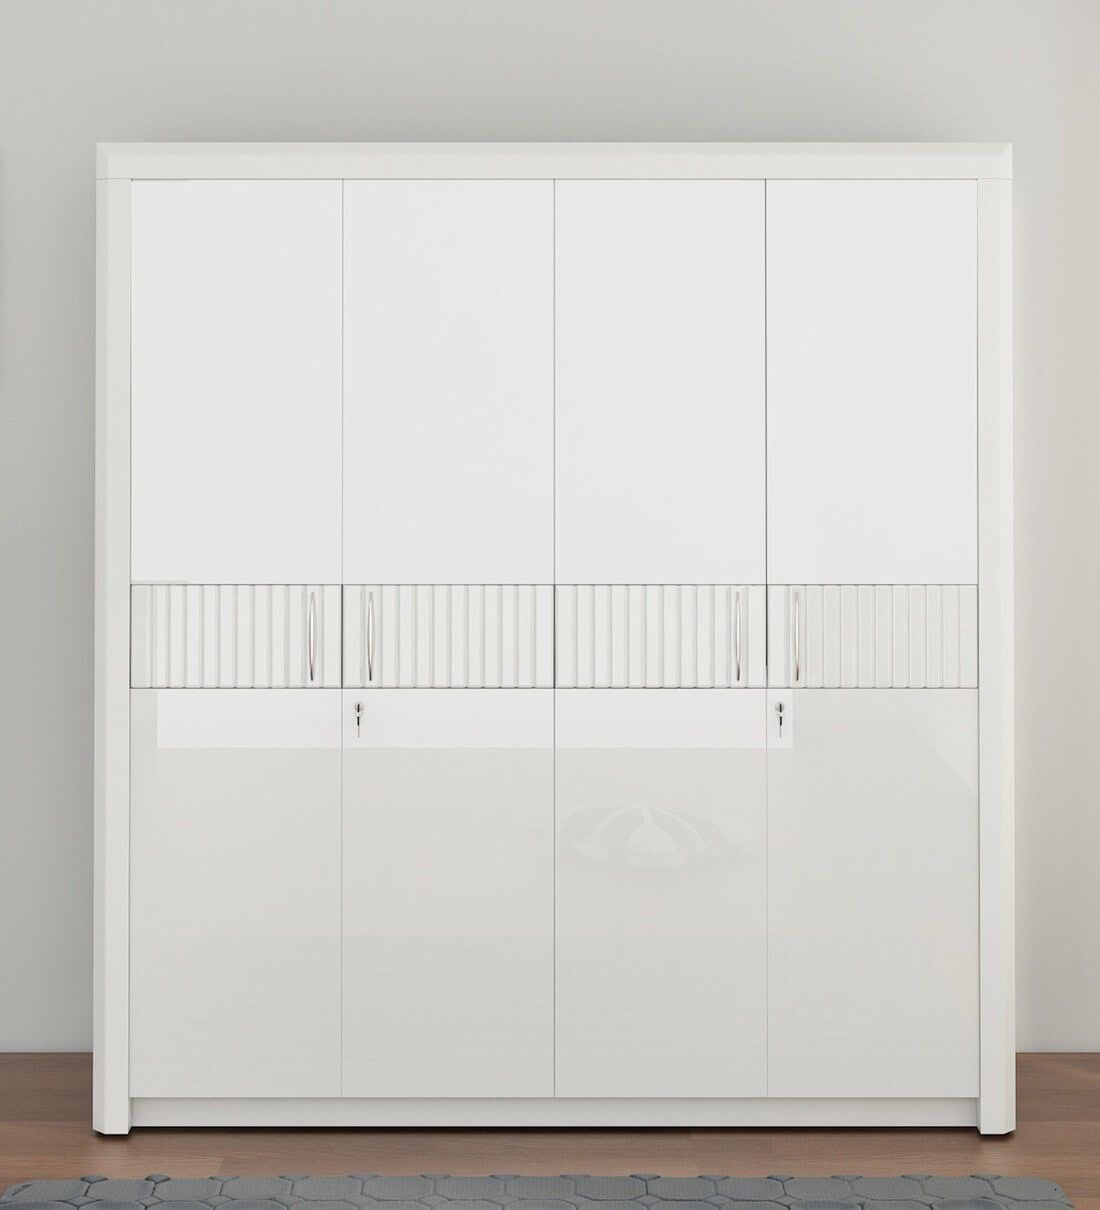 Buy Kosmo Arctic 4 Door Wardrobe In High Gloss White Finish At 31% Off Spacewood | Pepperfry With Regard To Arctic White Wardrobes (View 15 of 15)